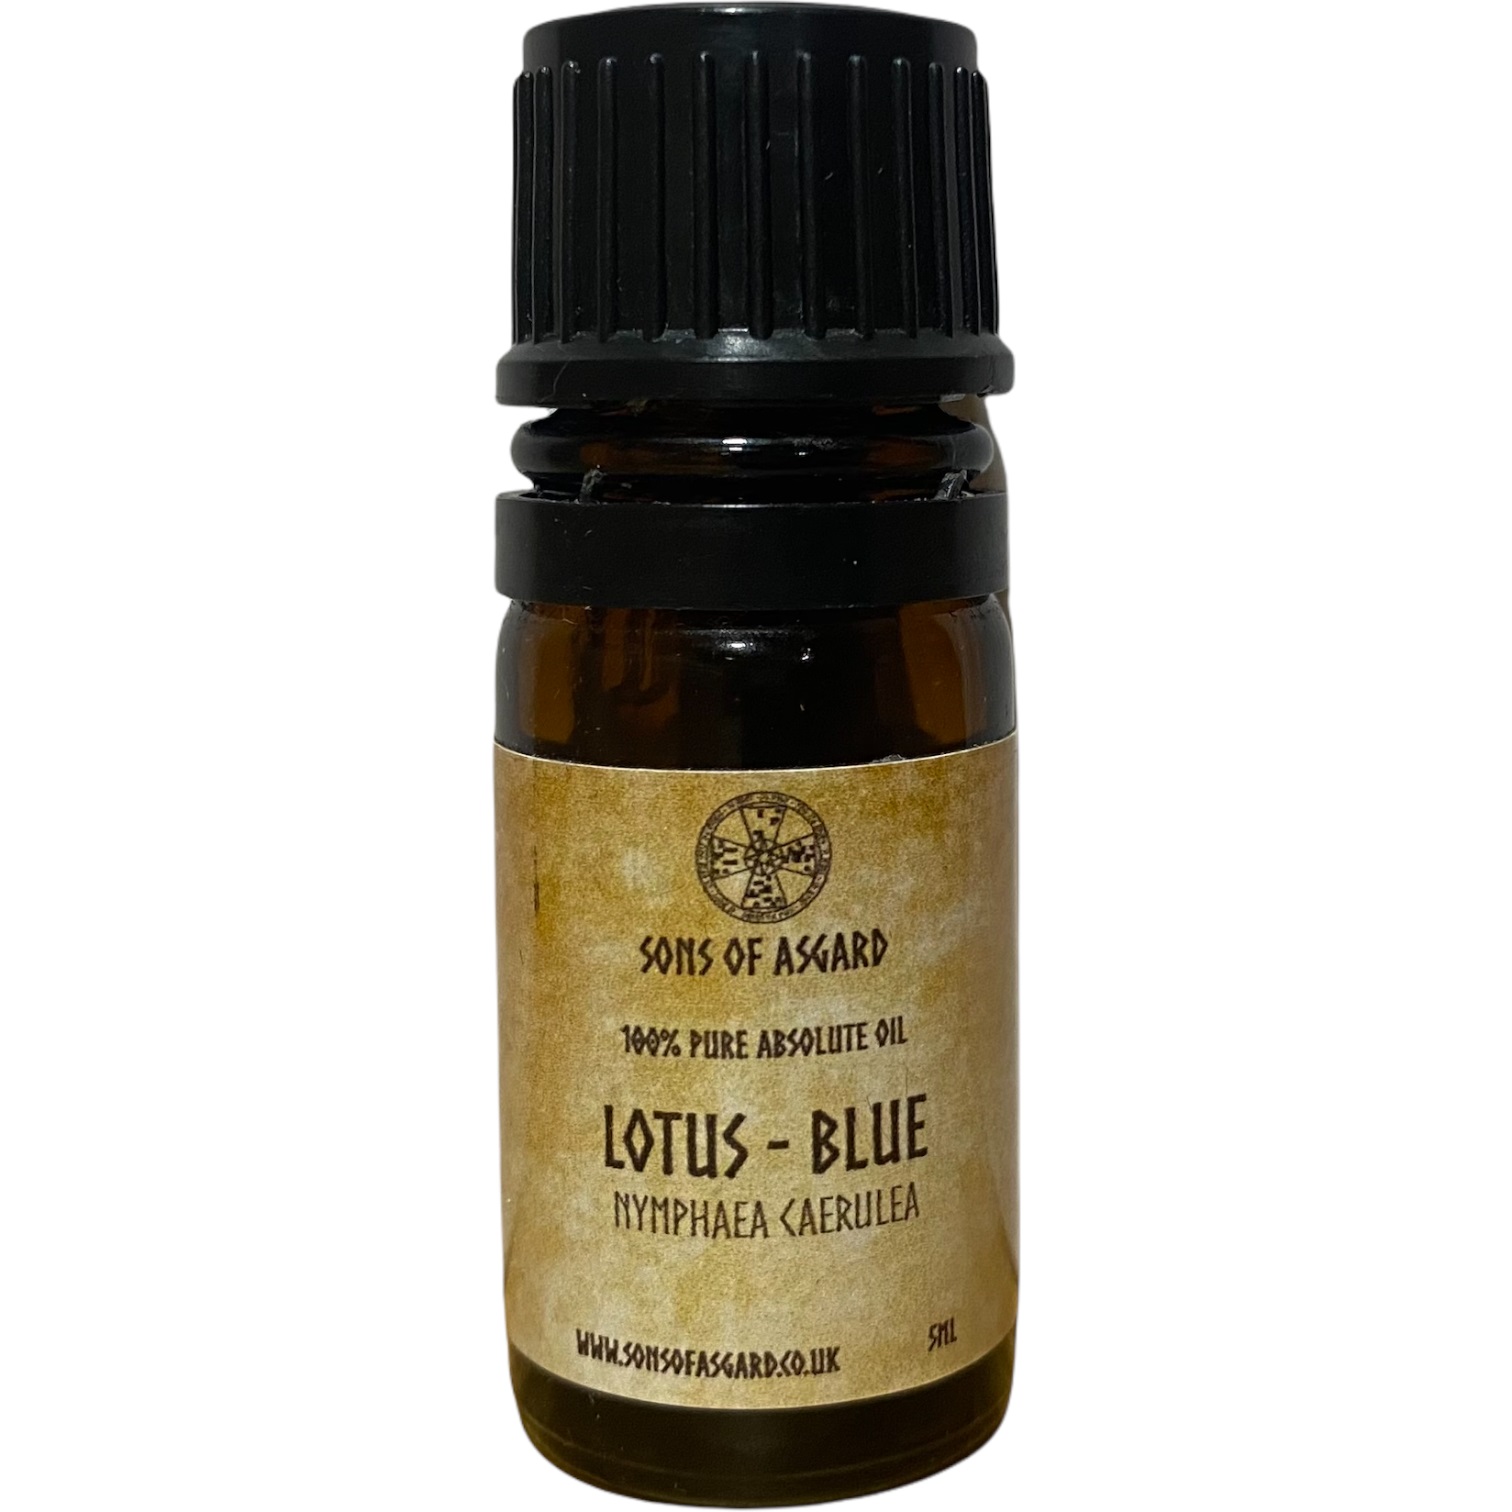 Lotus Blue - Pure Absolute